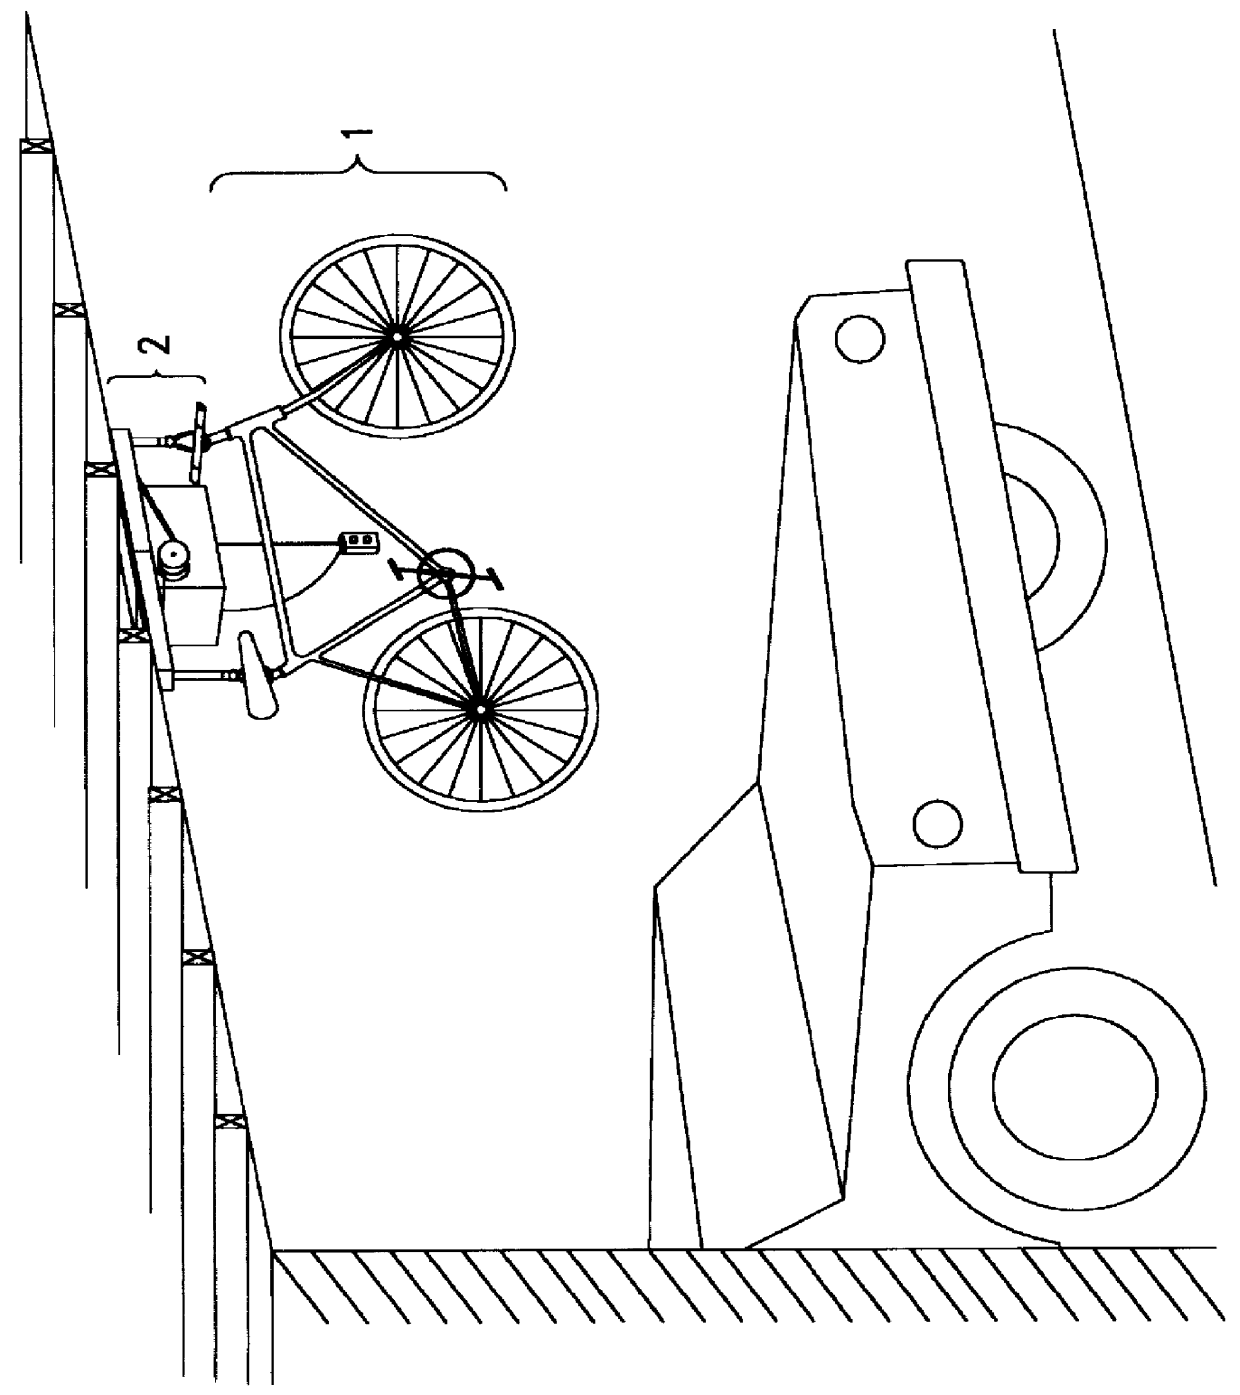 Lifting system for bicycle storage and methods using the same